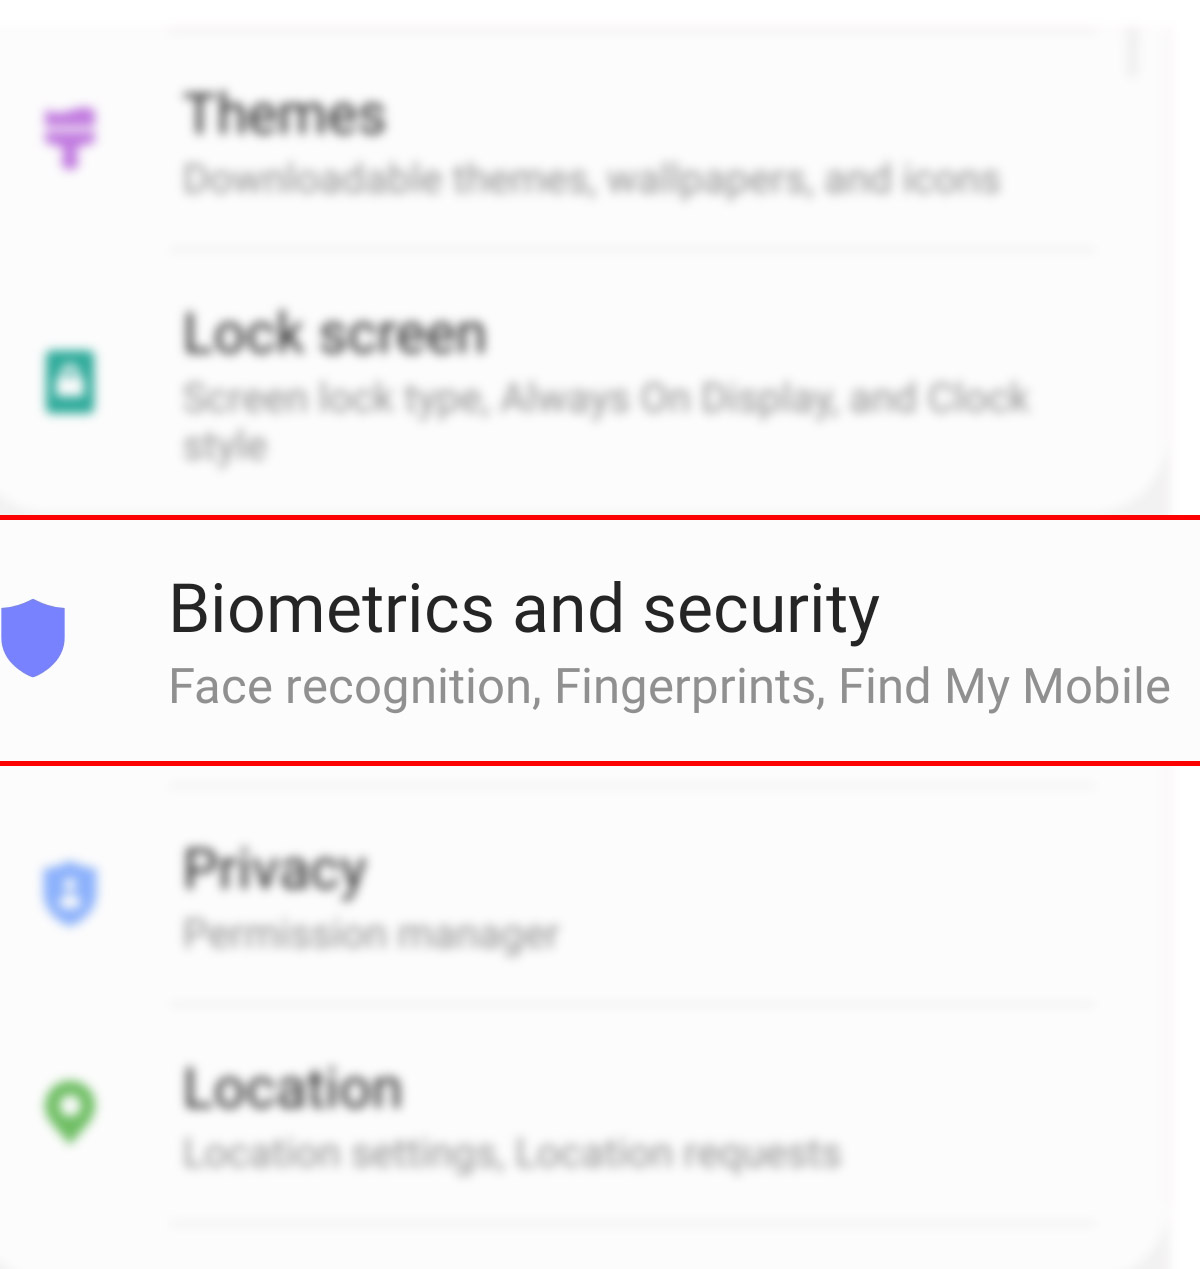 activate find my mobile remote control galaxy s20 - biometrics and security